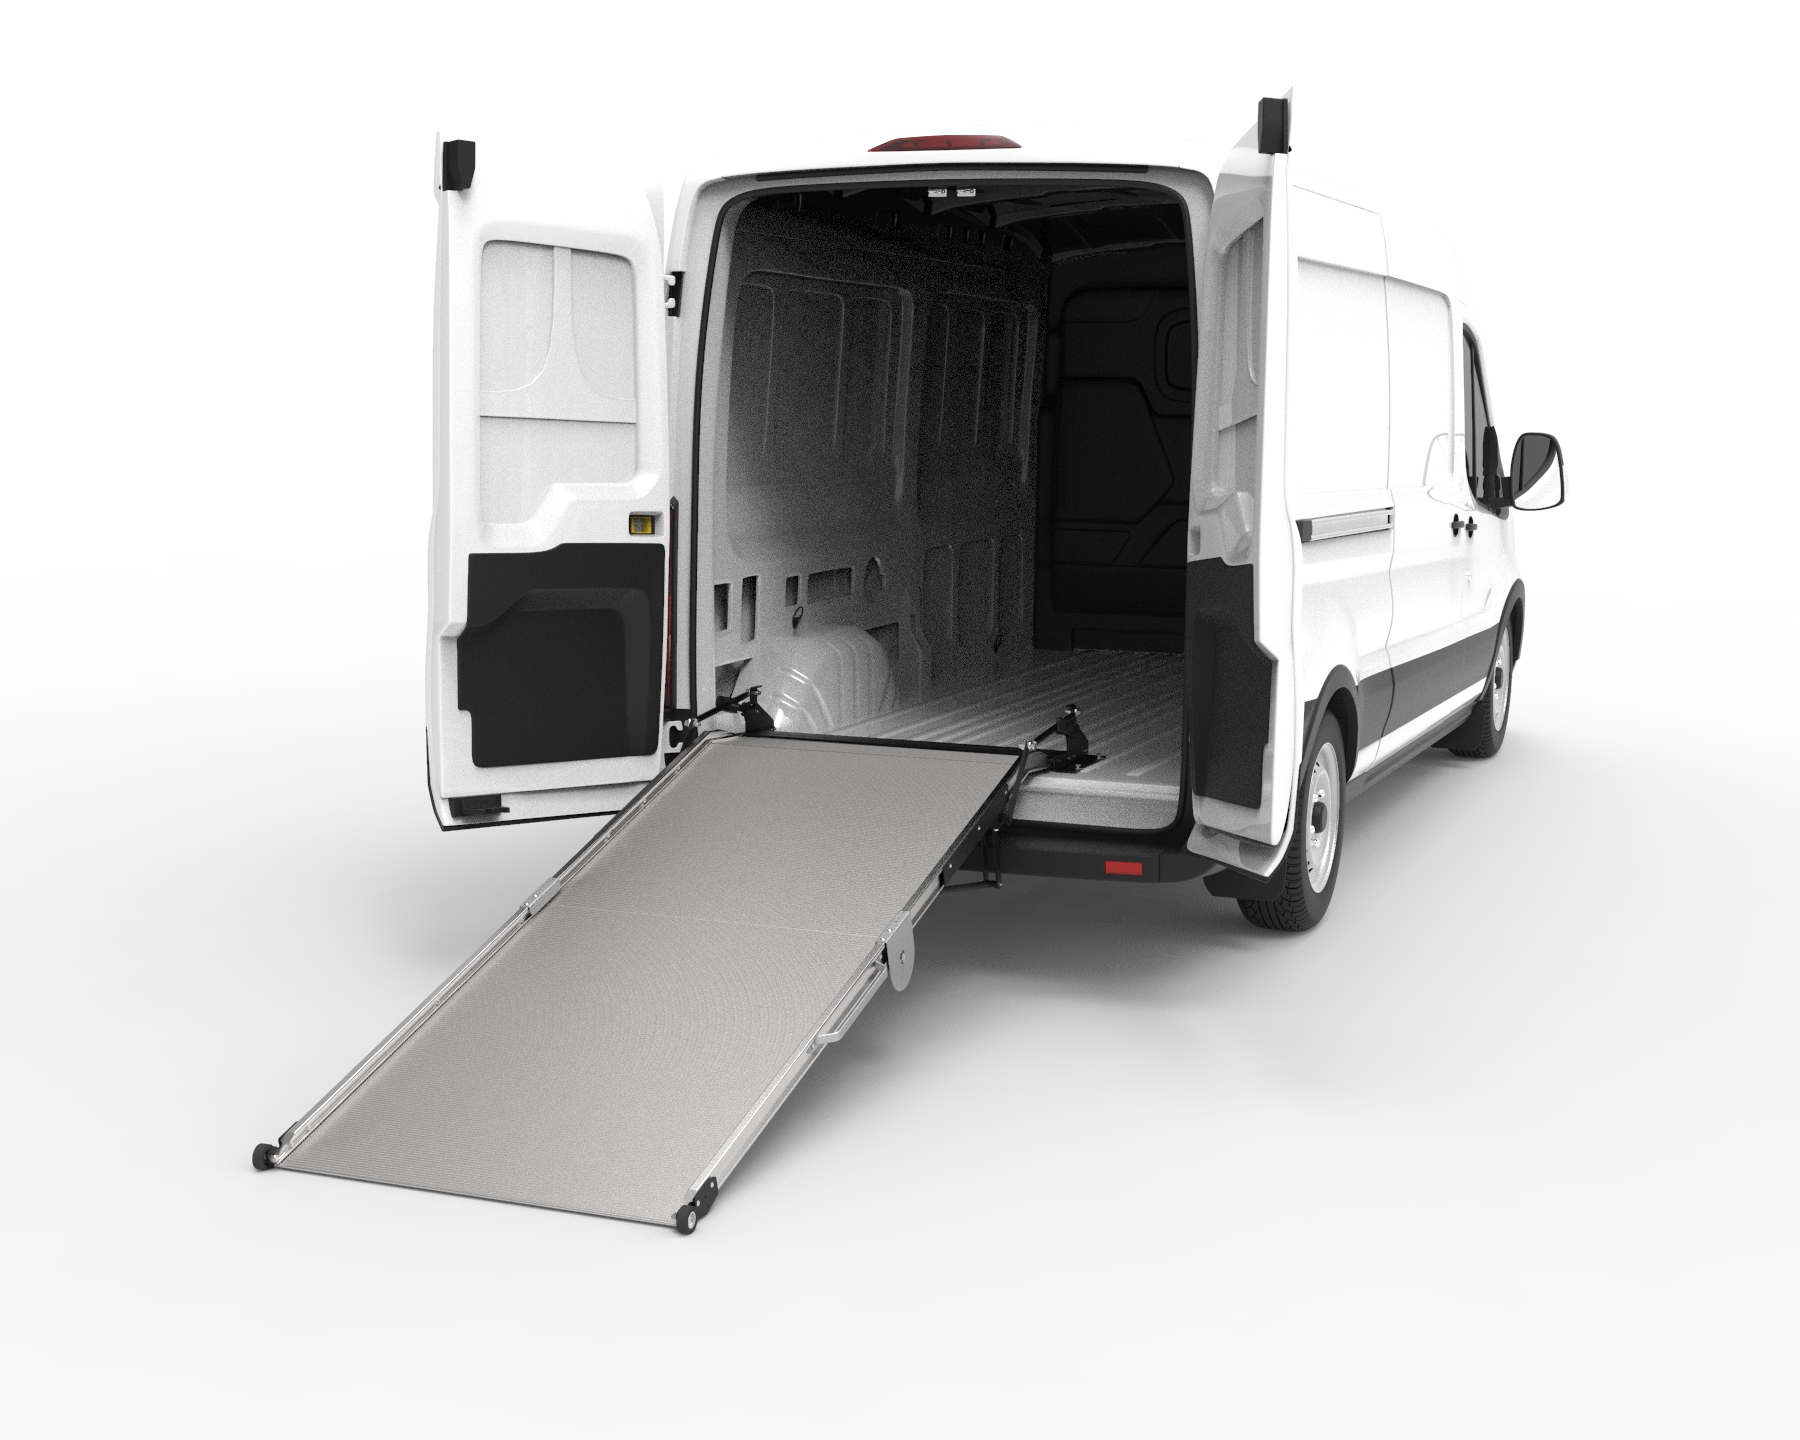 It fits Ford Transit cargo vans with medium and high roof configurations, and NISSAN NV, Dodge Ram ProMaster and Mercedes-Benz Sprinter cargo vans with high roof configurations.